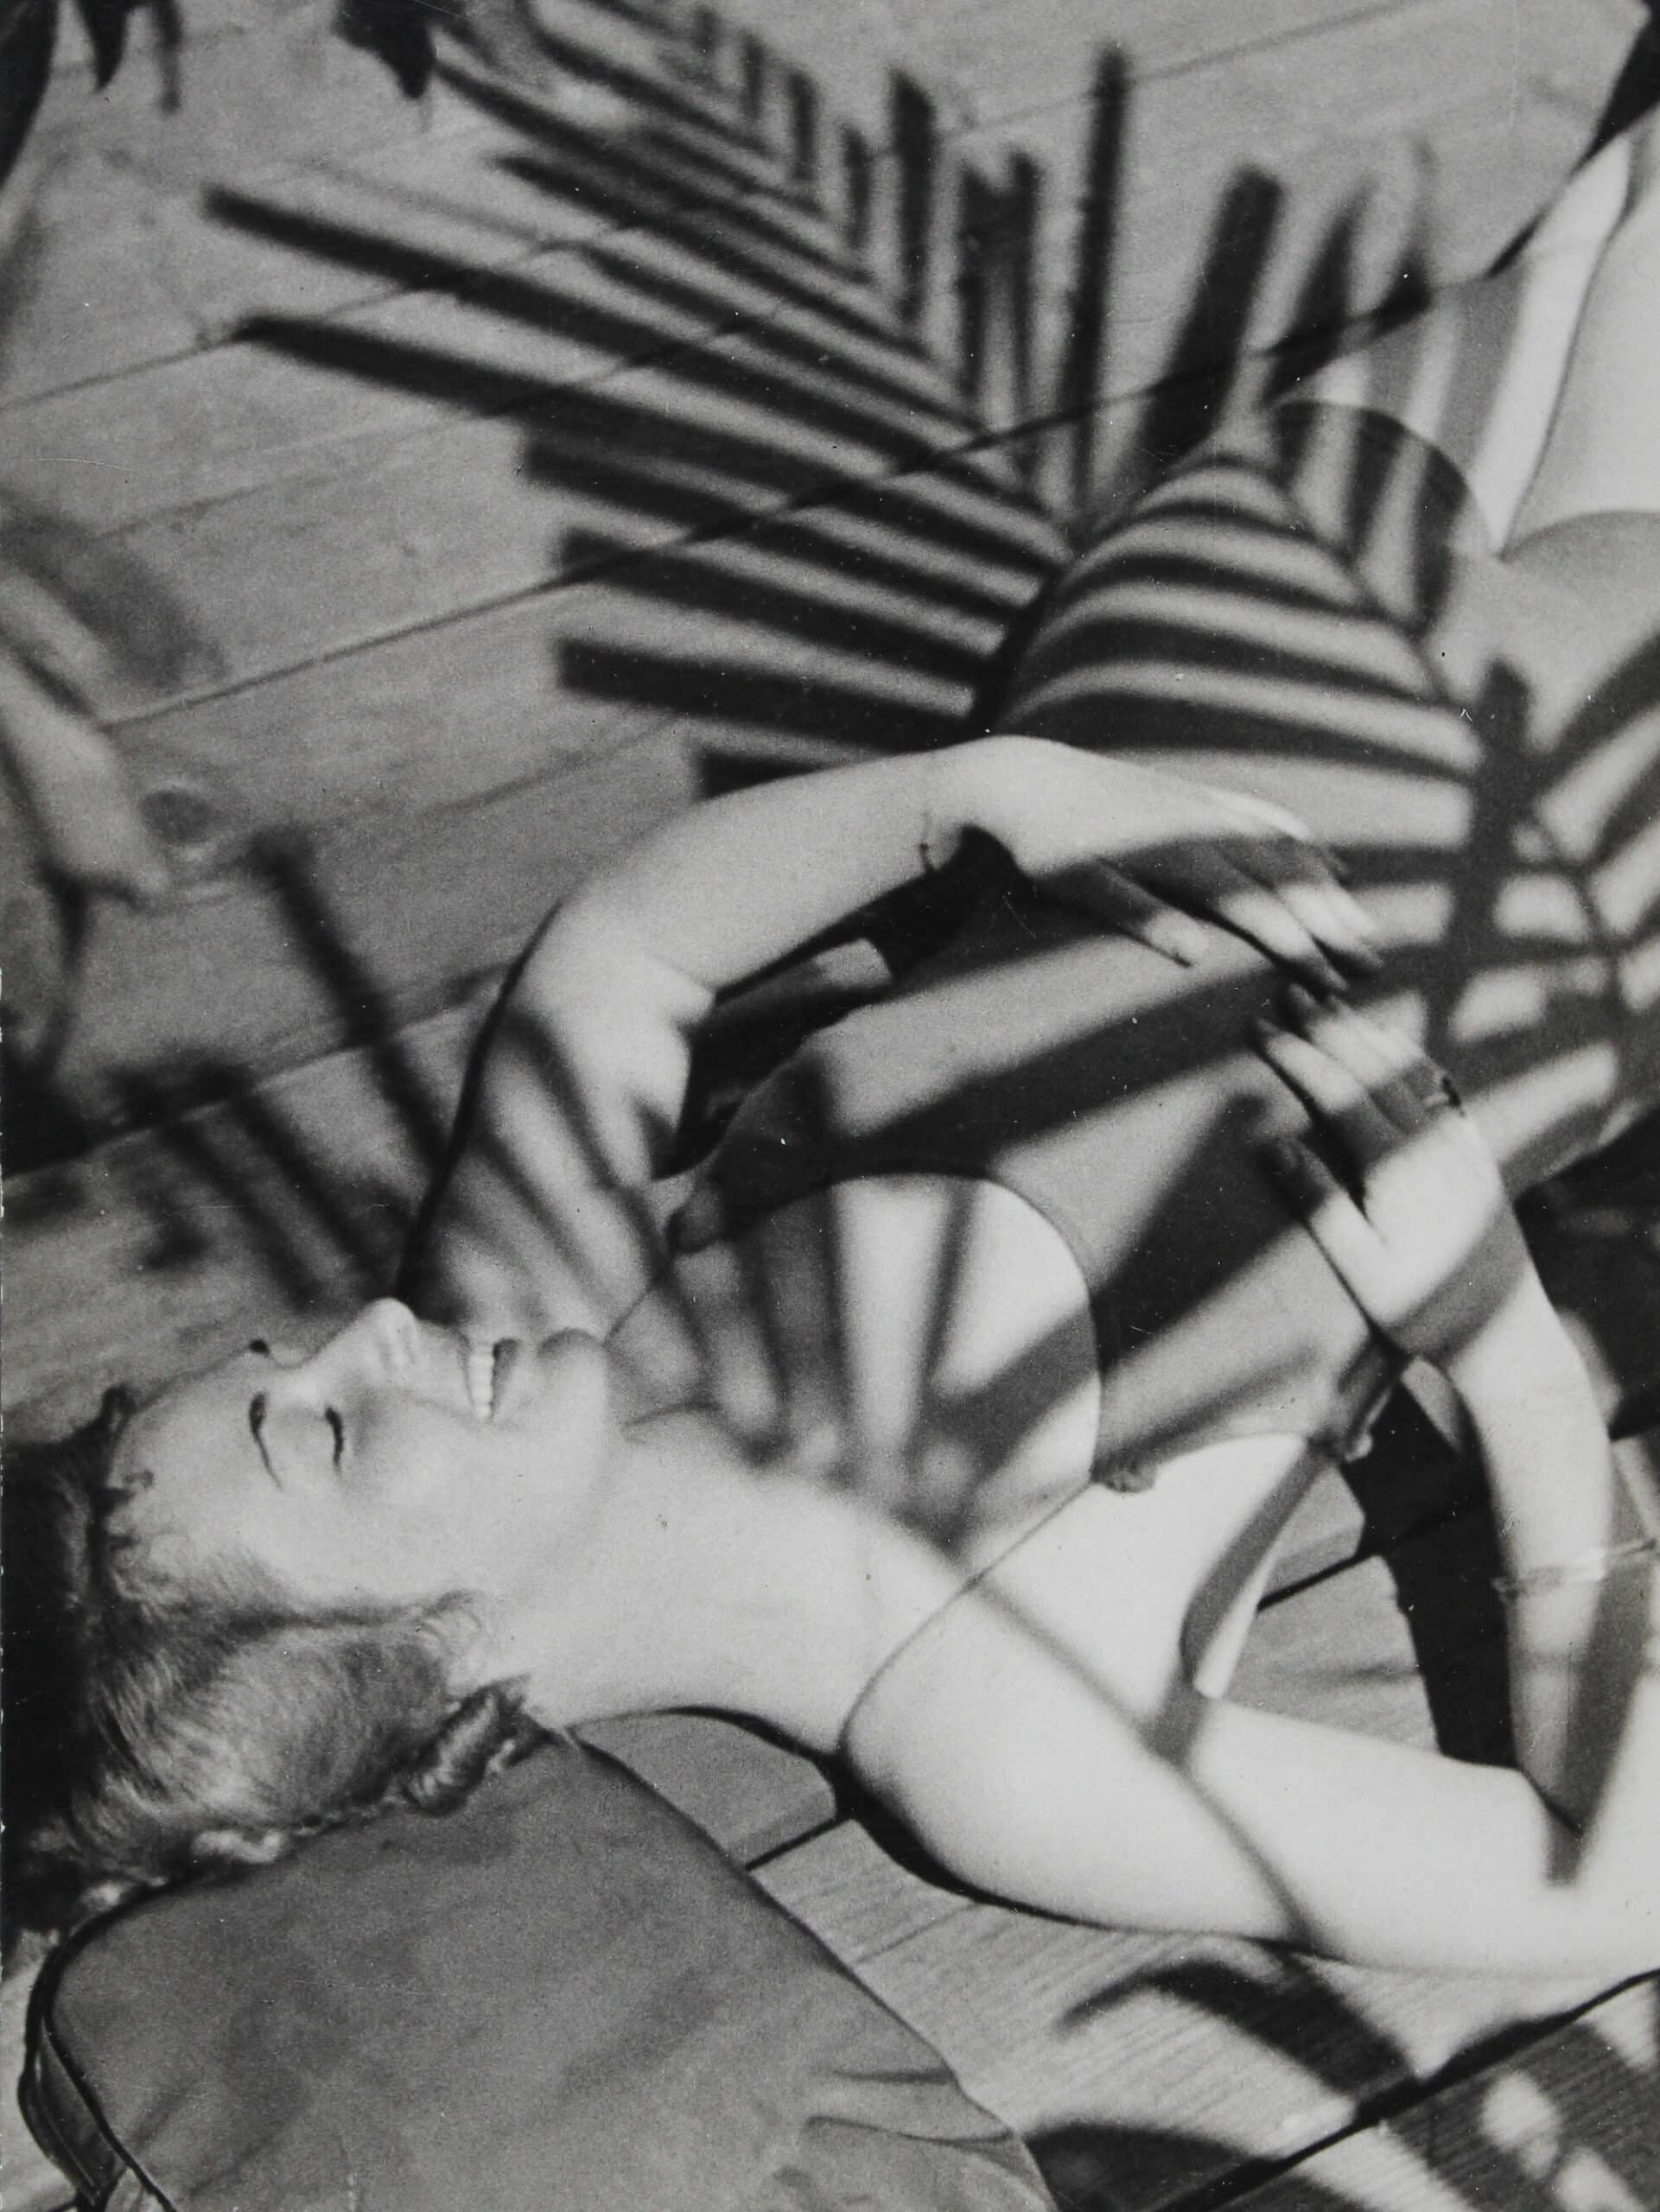 Woman in swimsuit with plants shadows, 1932 Vintage print © Paul Wolff / Collection Christian Brandstätter